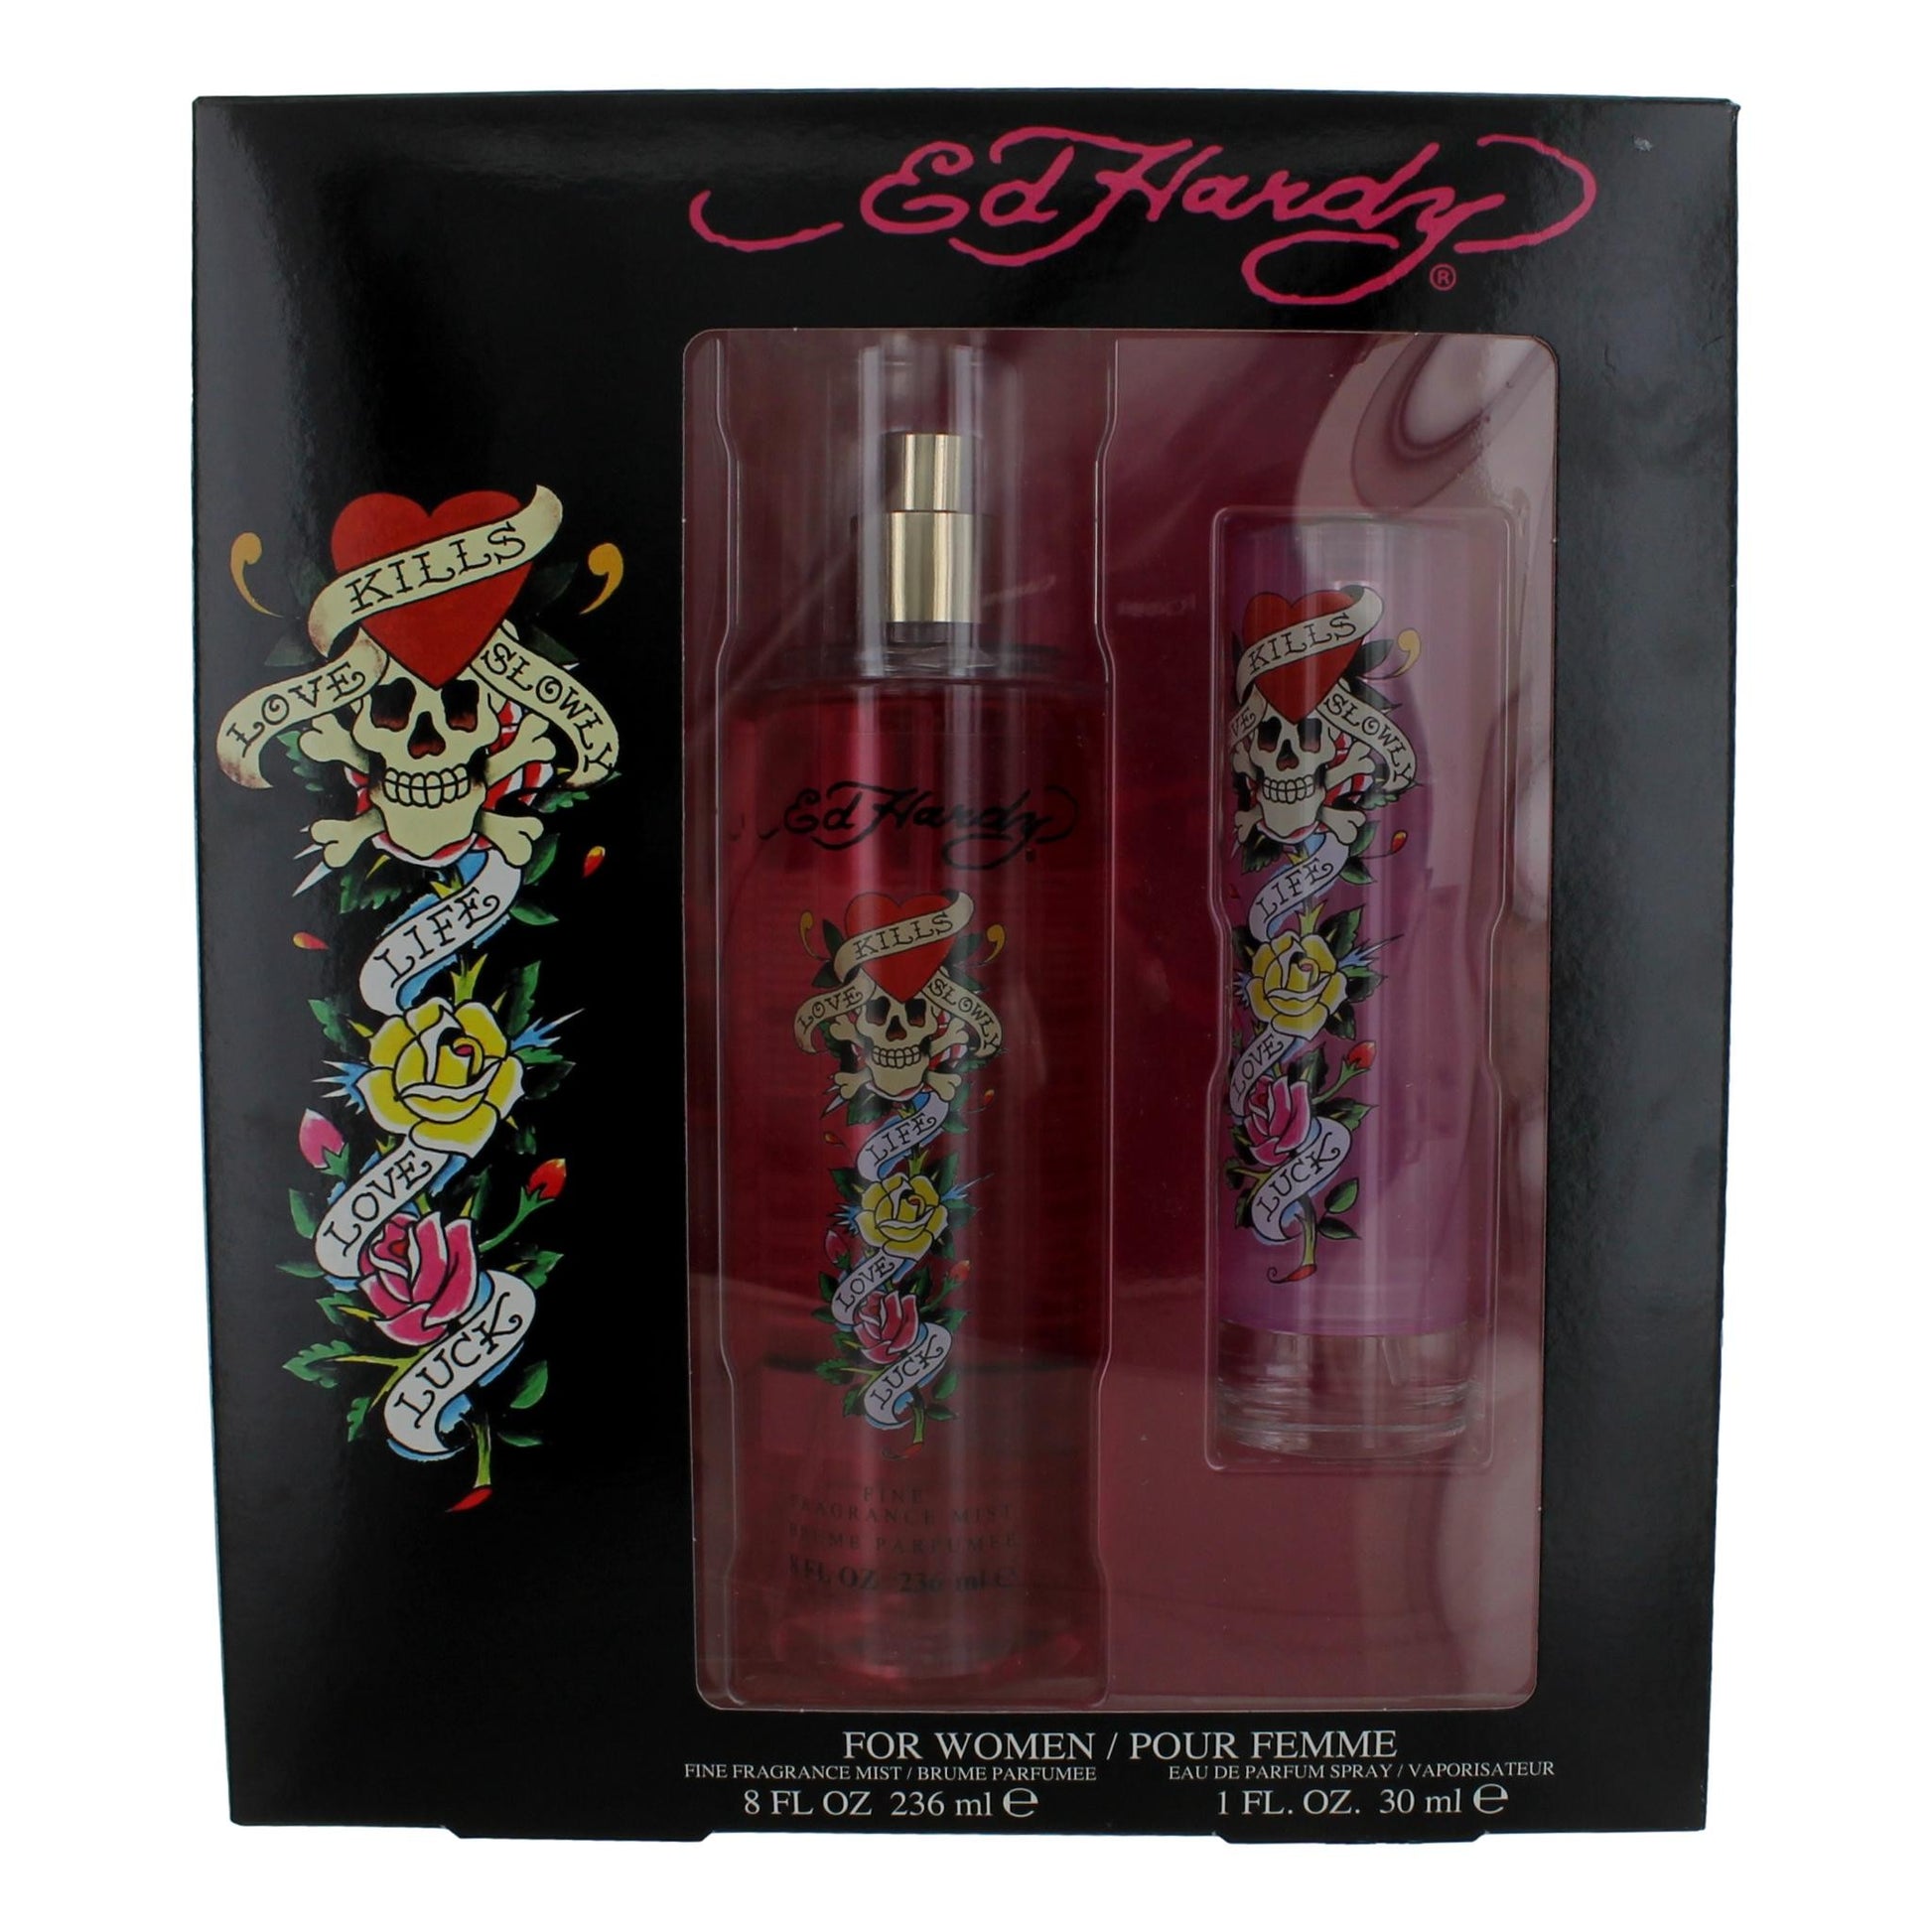 Ed Hardy by Christian Audigier, 2 Piece Gift Set for Women